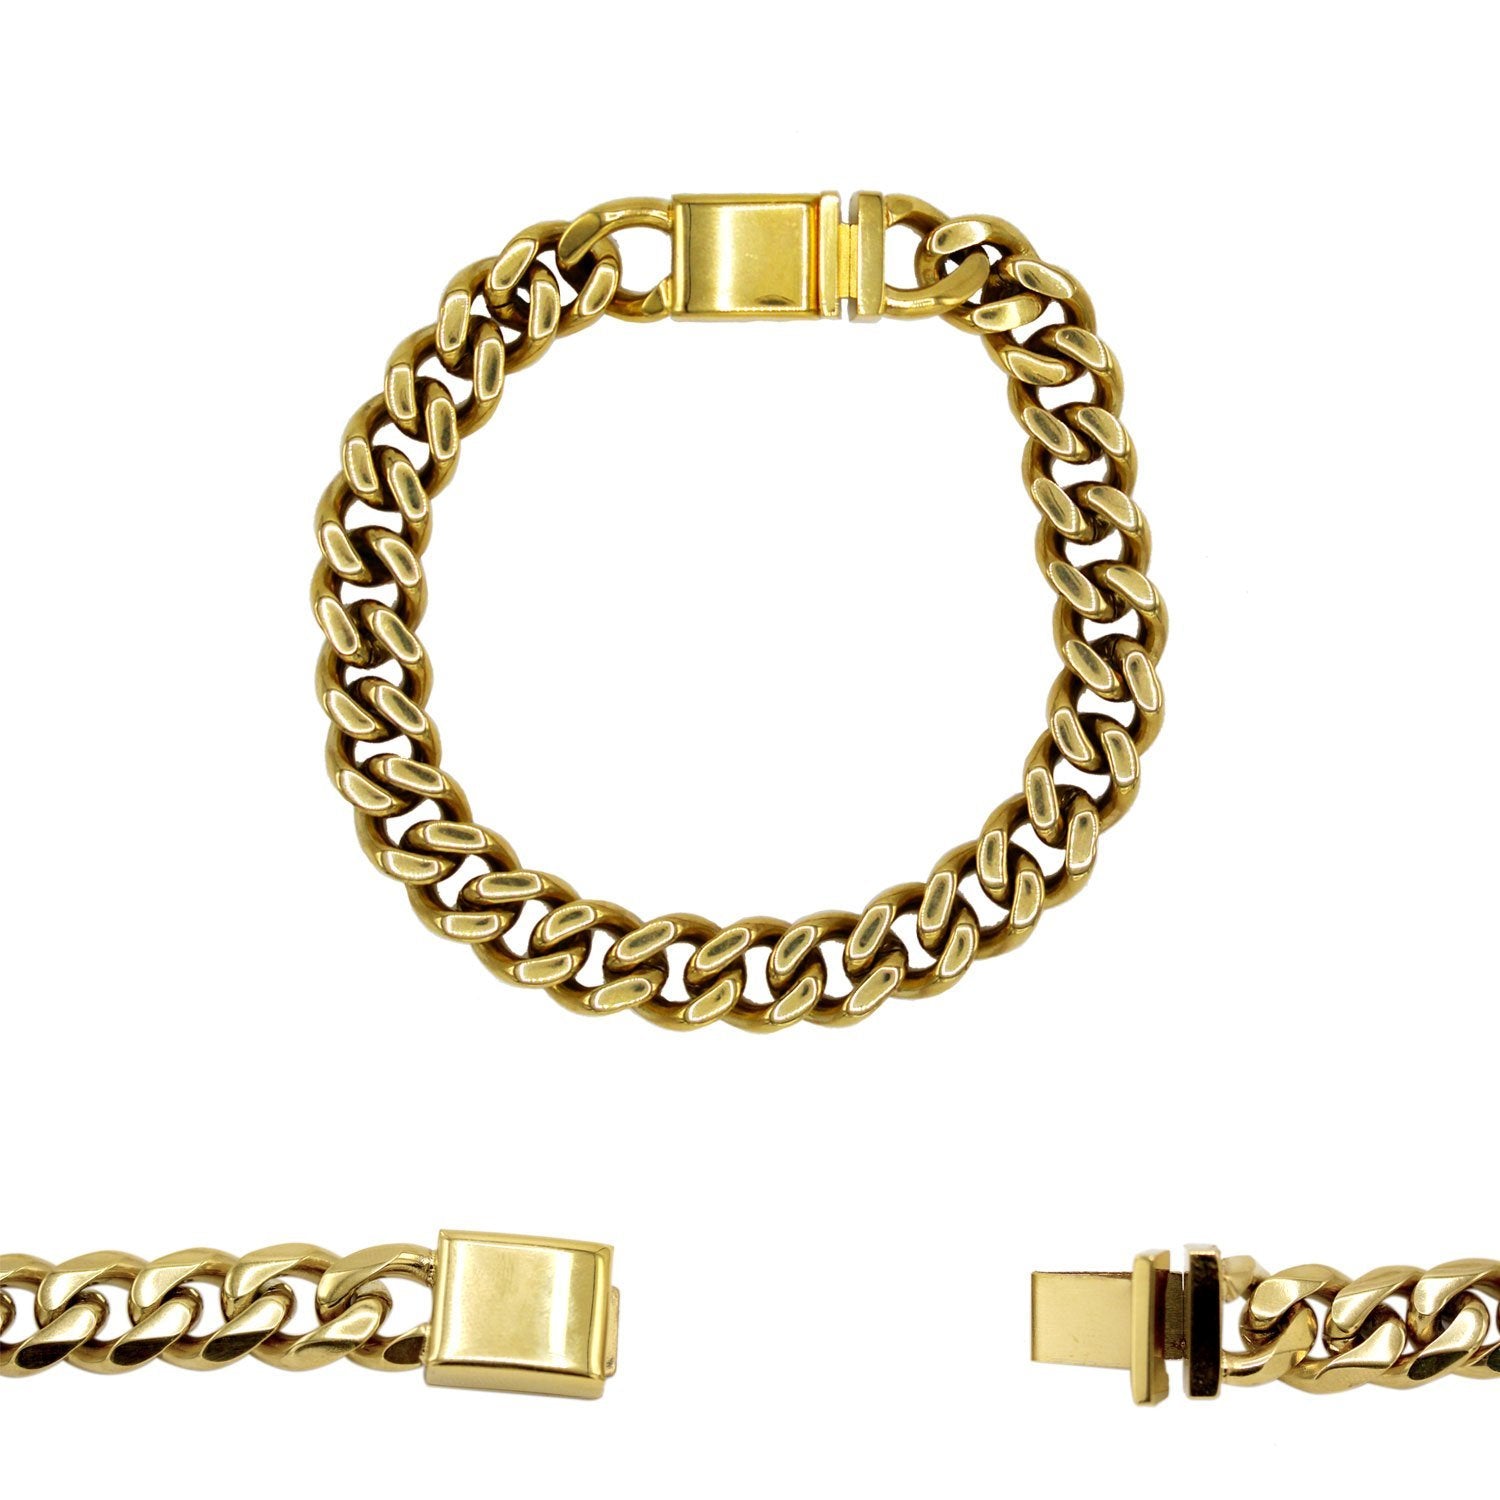 Miami Cuban Link Chain Bracelet 18k Gold Plated Stainless Steel Men Jewelry